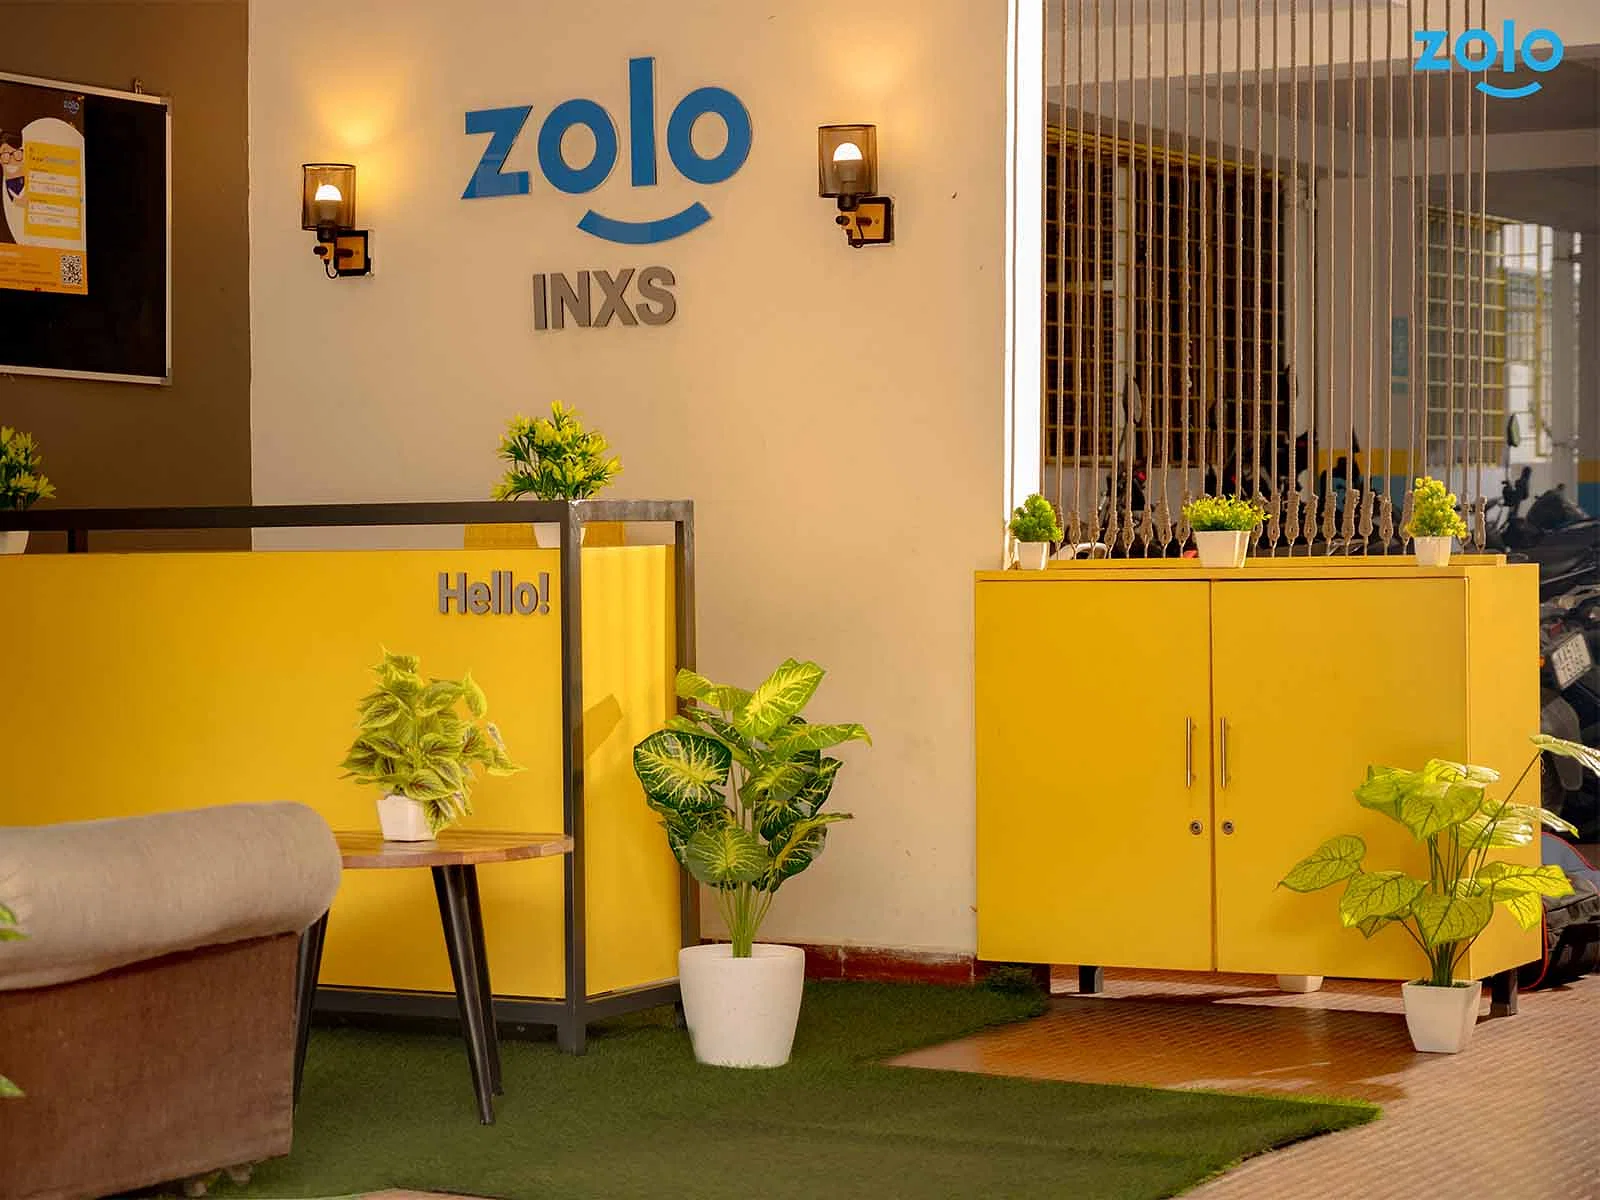 Affordable single rooms for students and working professionals in HSR Layout-Bangalore-Zolo Inxs